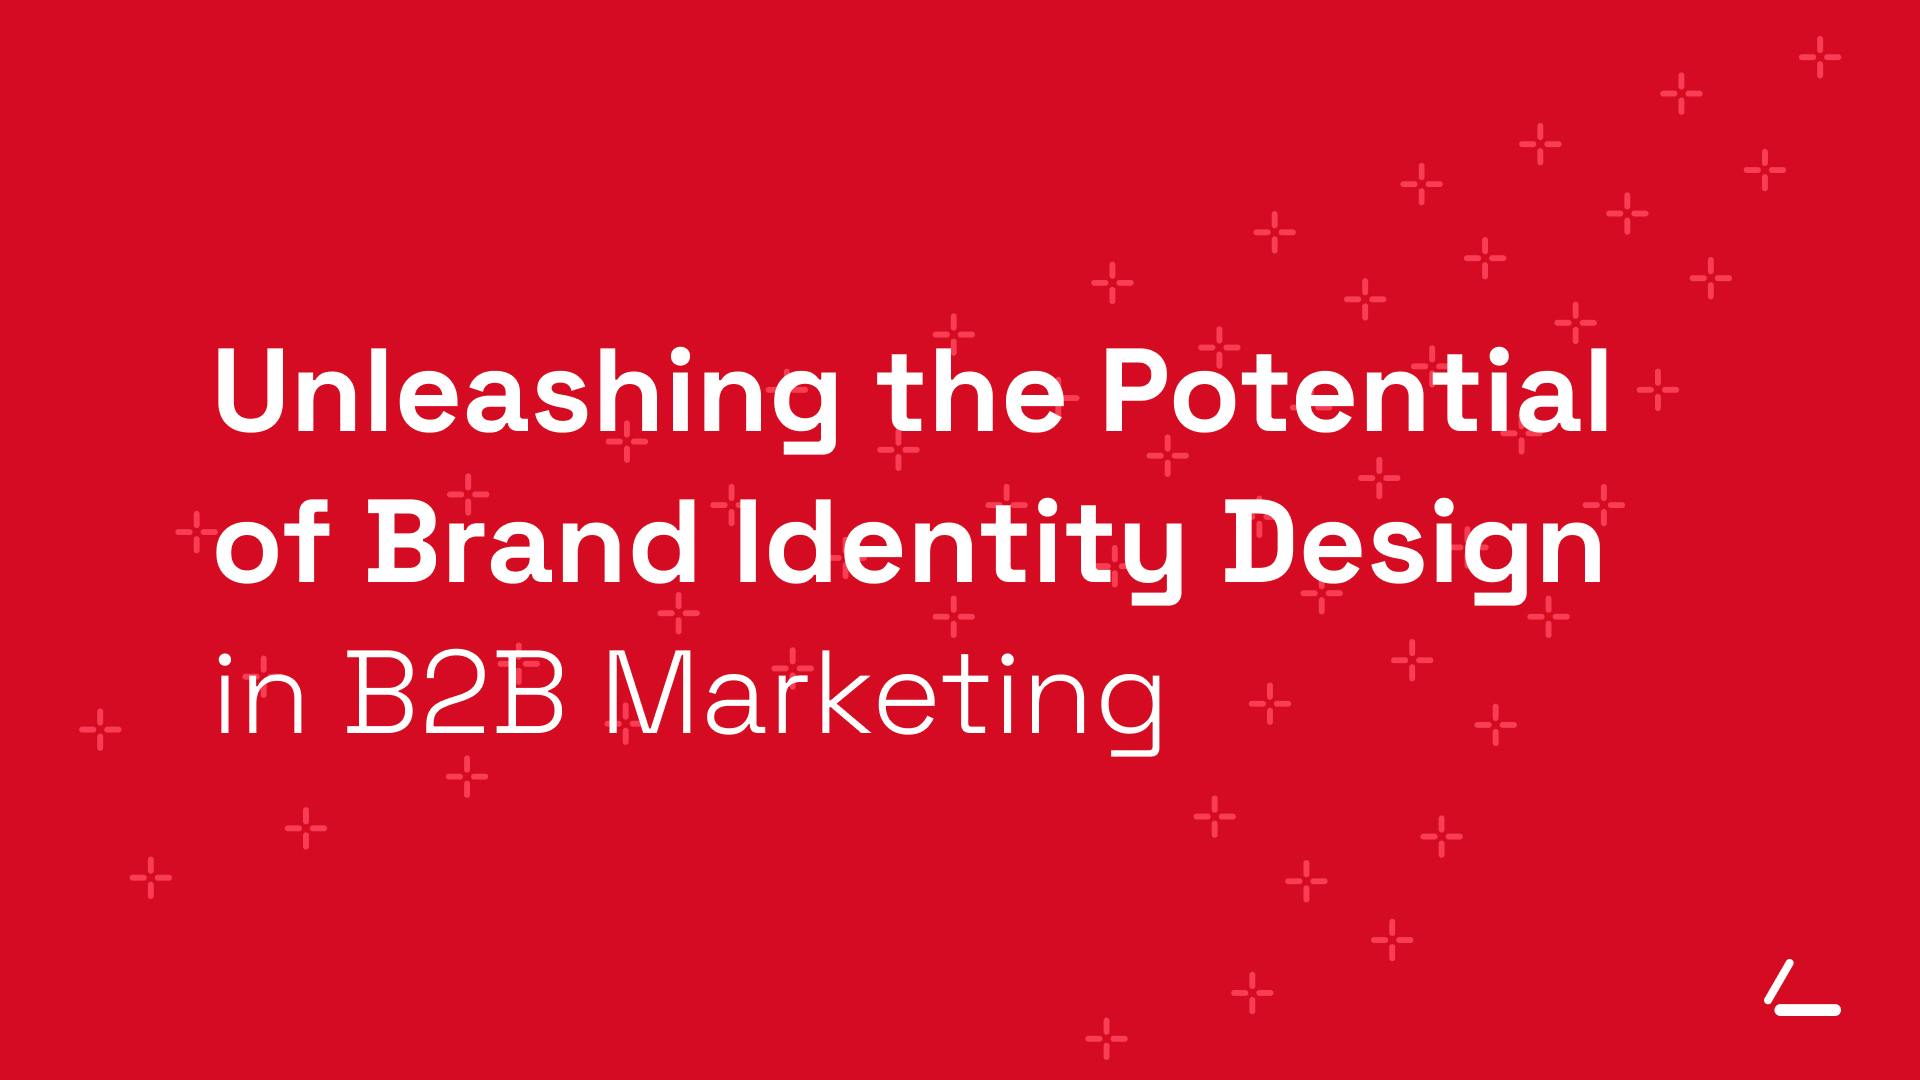 SEO Article Header - Red background with text about Brand Identity Design